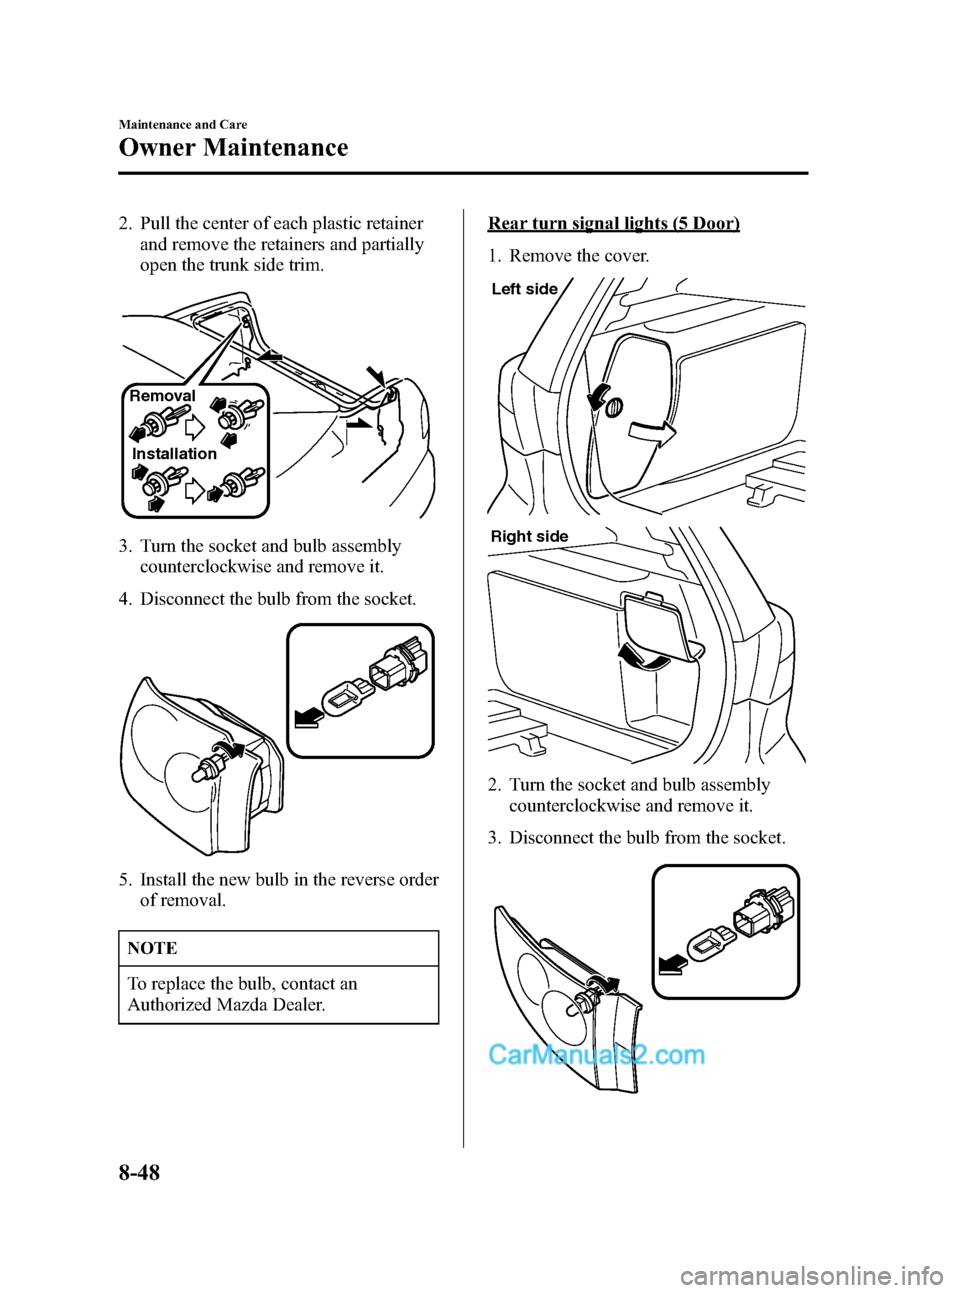 MAZDA MODEL MAZDASPEED 3 2007   (in English) User Guide Black plate (322,1)
2. Pull the center of each plastic retainer
and remove the retainers and partially
open the trunk side trim.
Removal
Installation
3. Turn the socket and bulb assembly
counterclockw